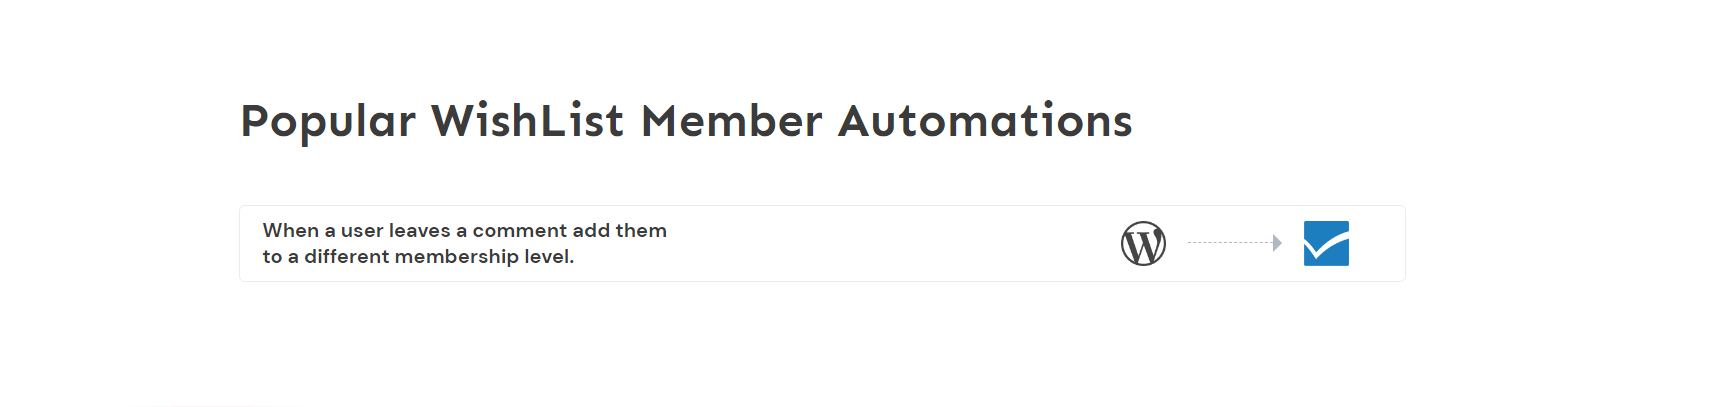 Snapshot of an Wishlist Member automation in Thrive Automator